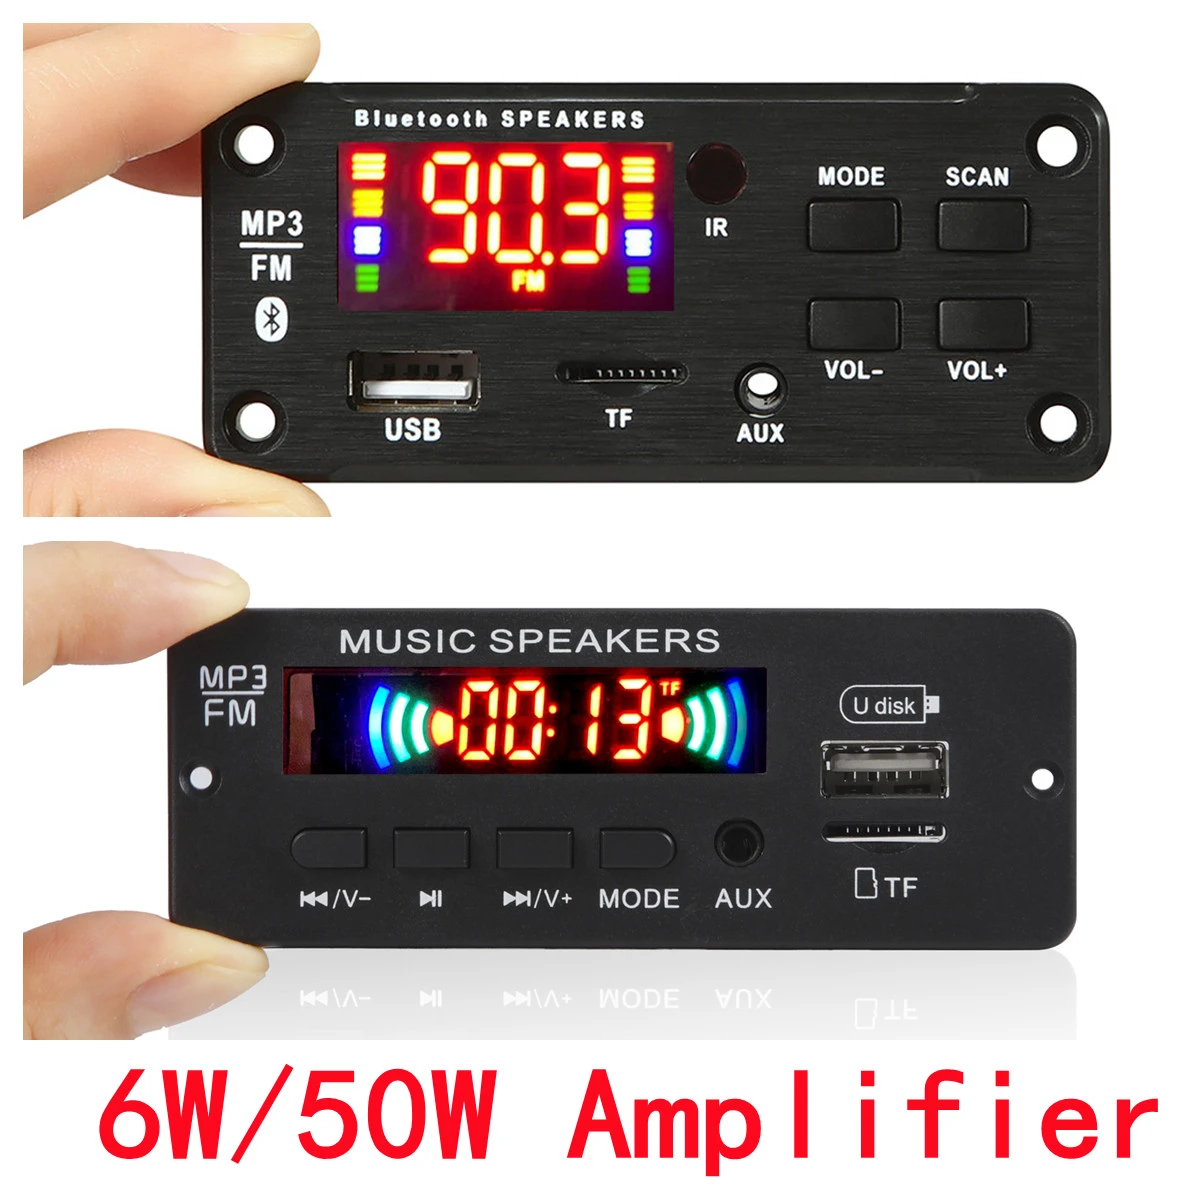 Amplifier Handsfree MP3 Player Decoder Board 12V Bluetooth 5.0 Car FM Radio Module Support TF USB AUX Recorders android mp3 player